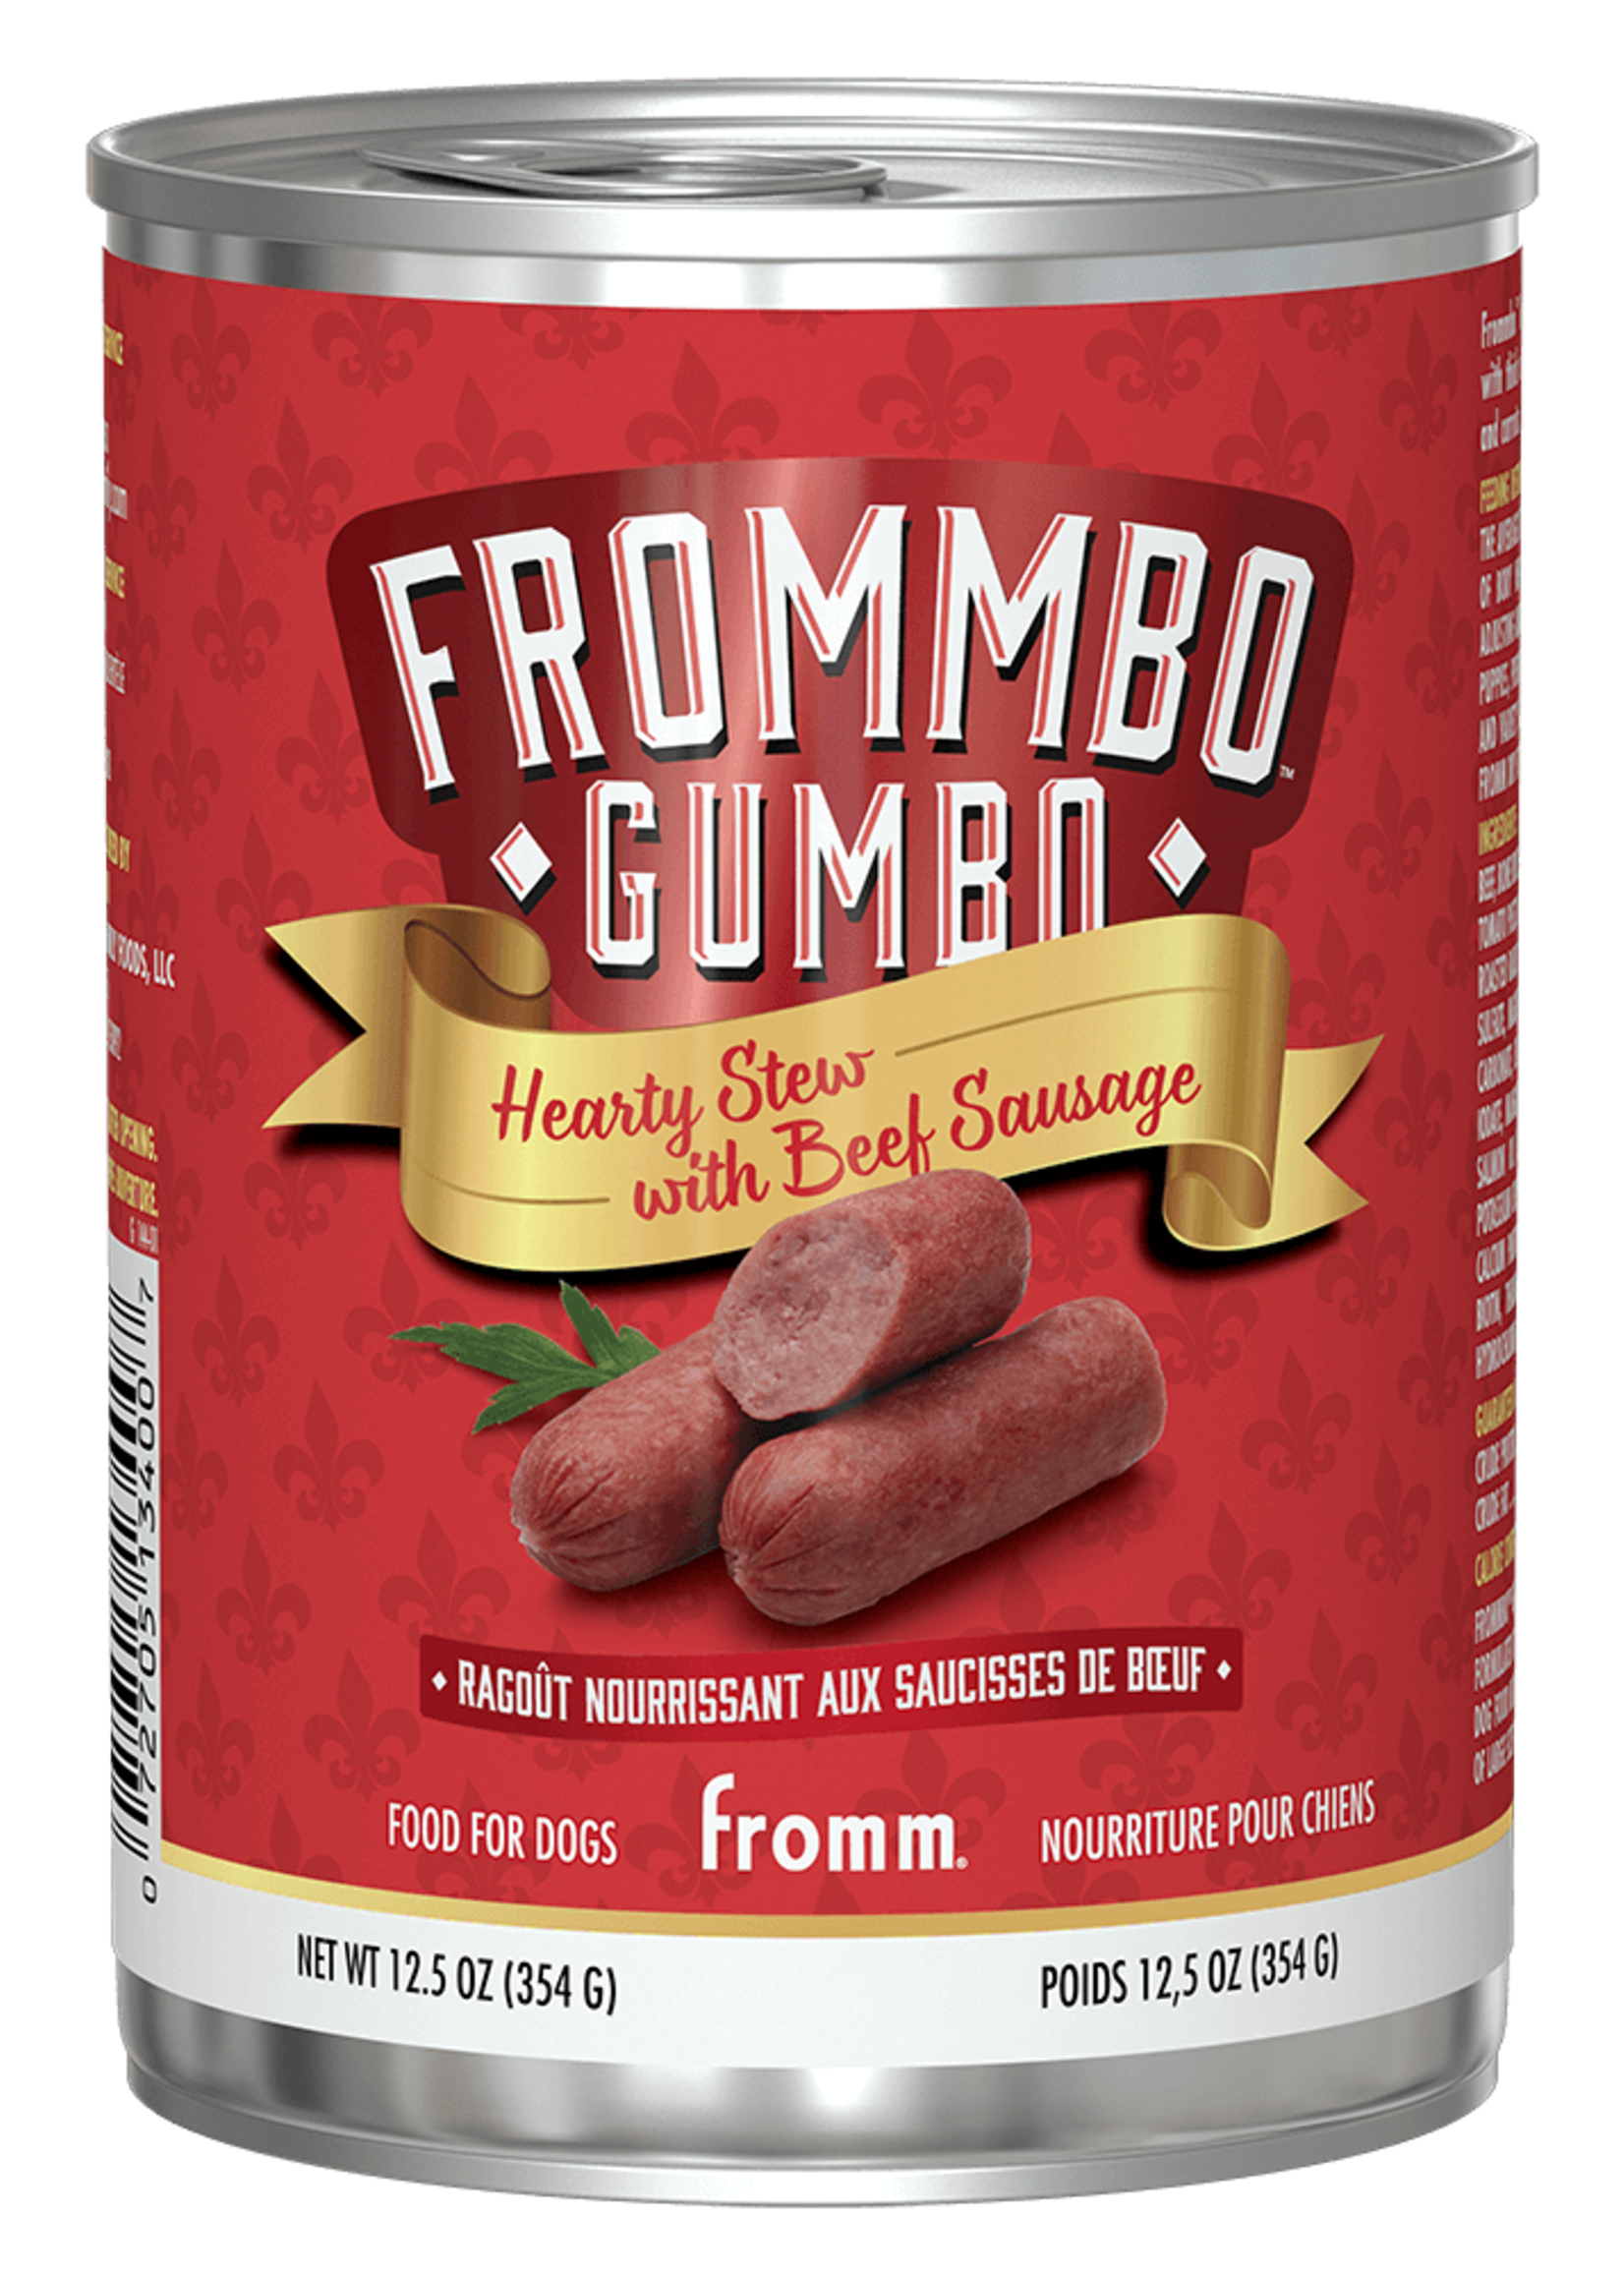 Fromm Family Pet Food Fromm dog Frommbo Gumbo Hearty Stew w/ Beef Sausage 12/12.5 oz